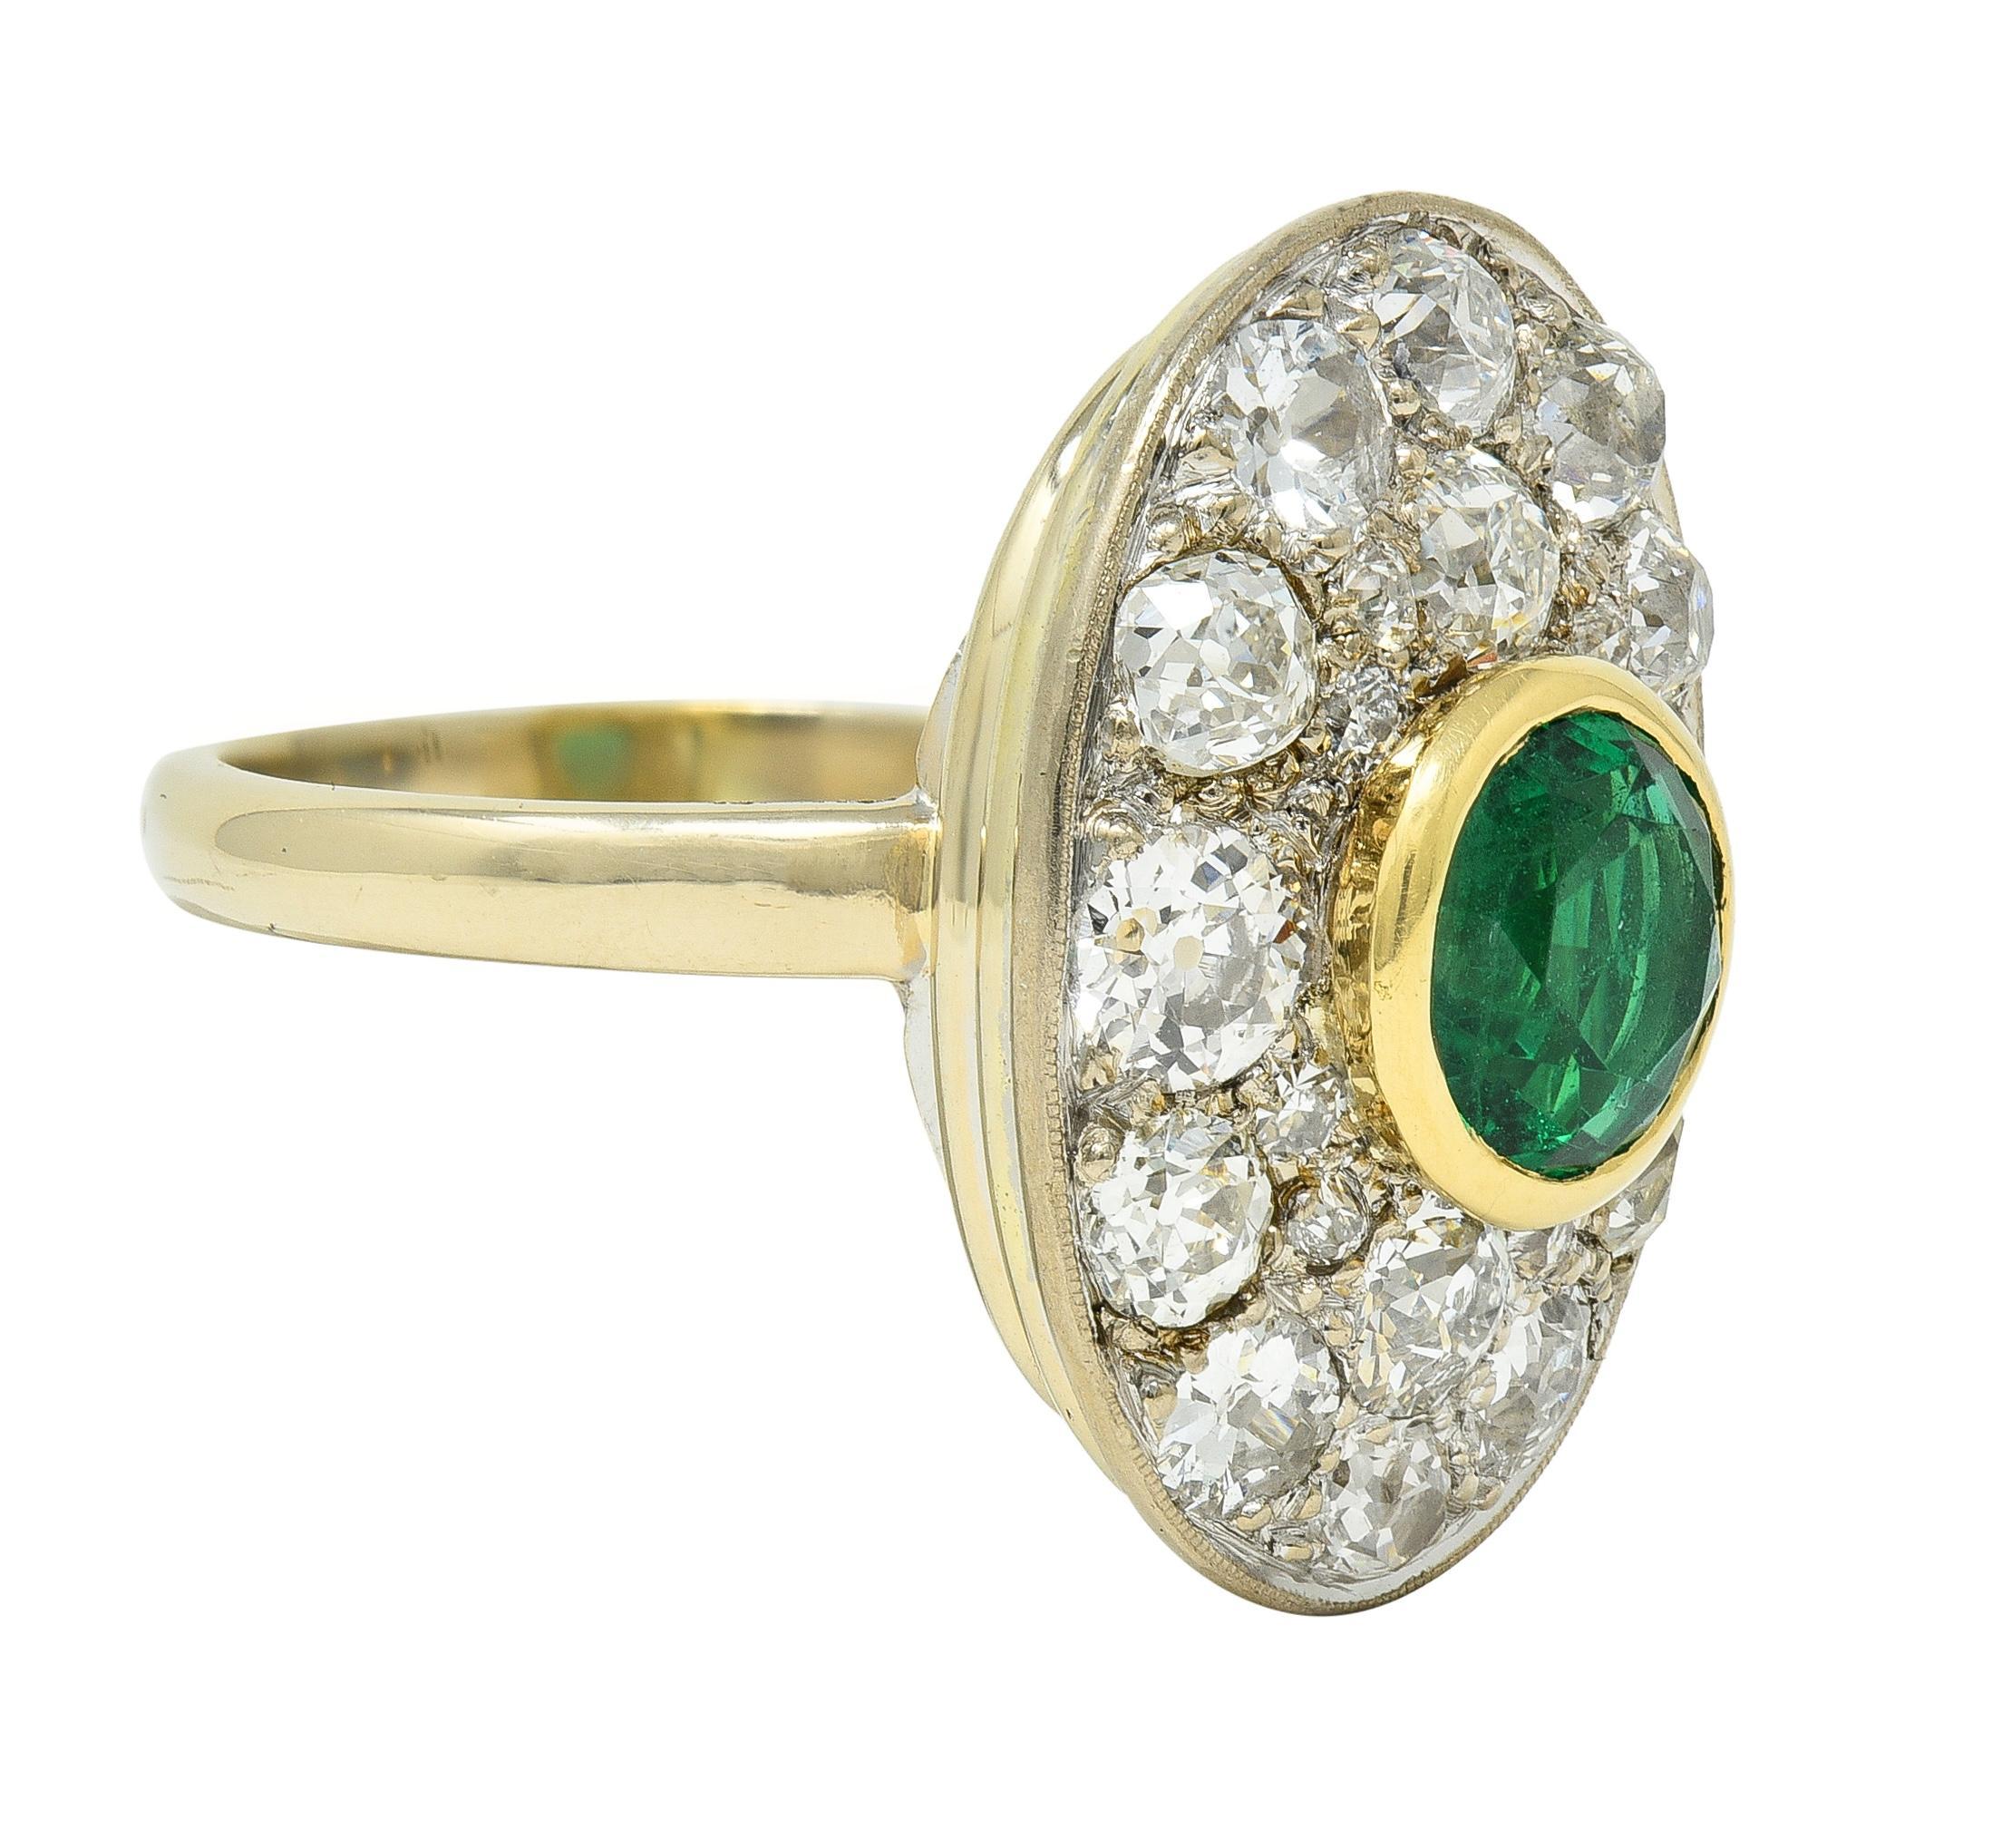 Centering a round cut emerald weighing 1.49 carats - transparent medium green in color
Natural Zambian in origin displaying minor clarity enhancement - F1
Set in a yellow gold bezel atop a recessed oval-shaped platinum form
Bead set with clustered